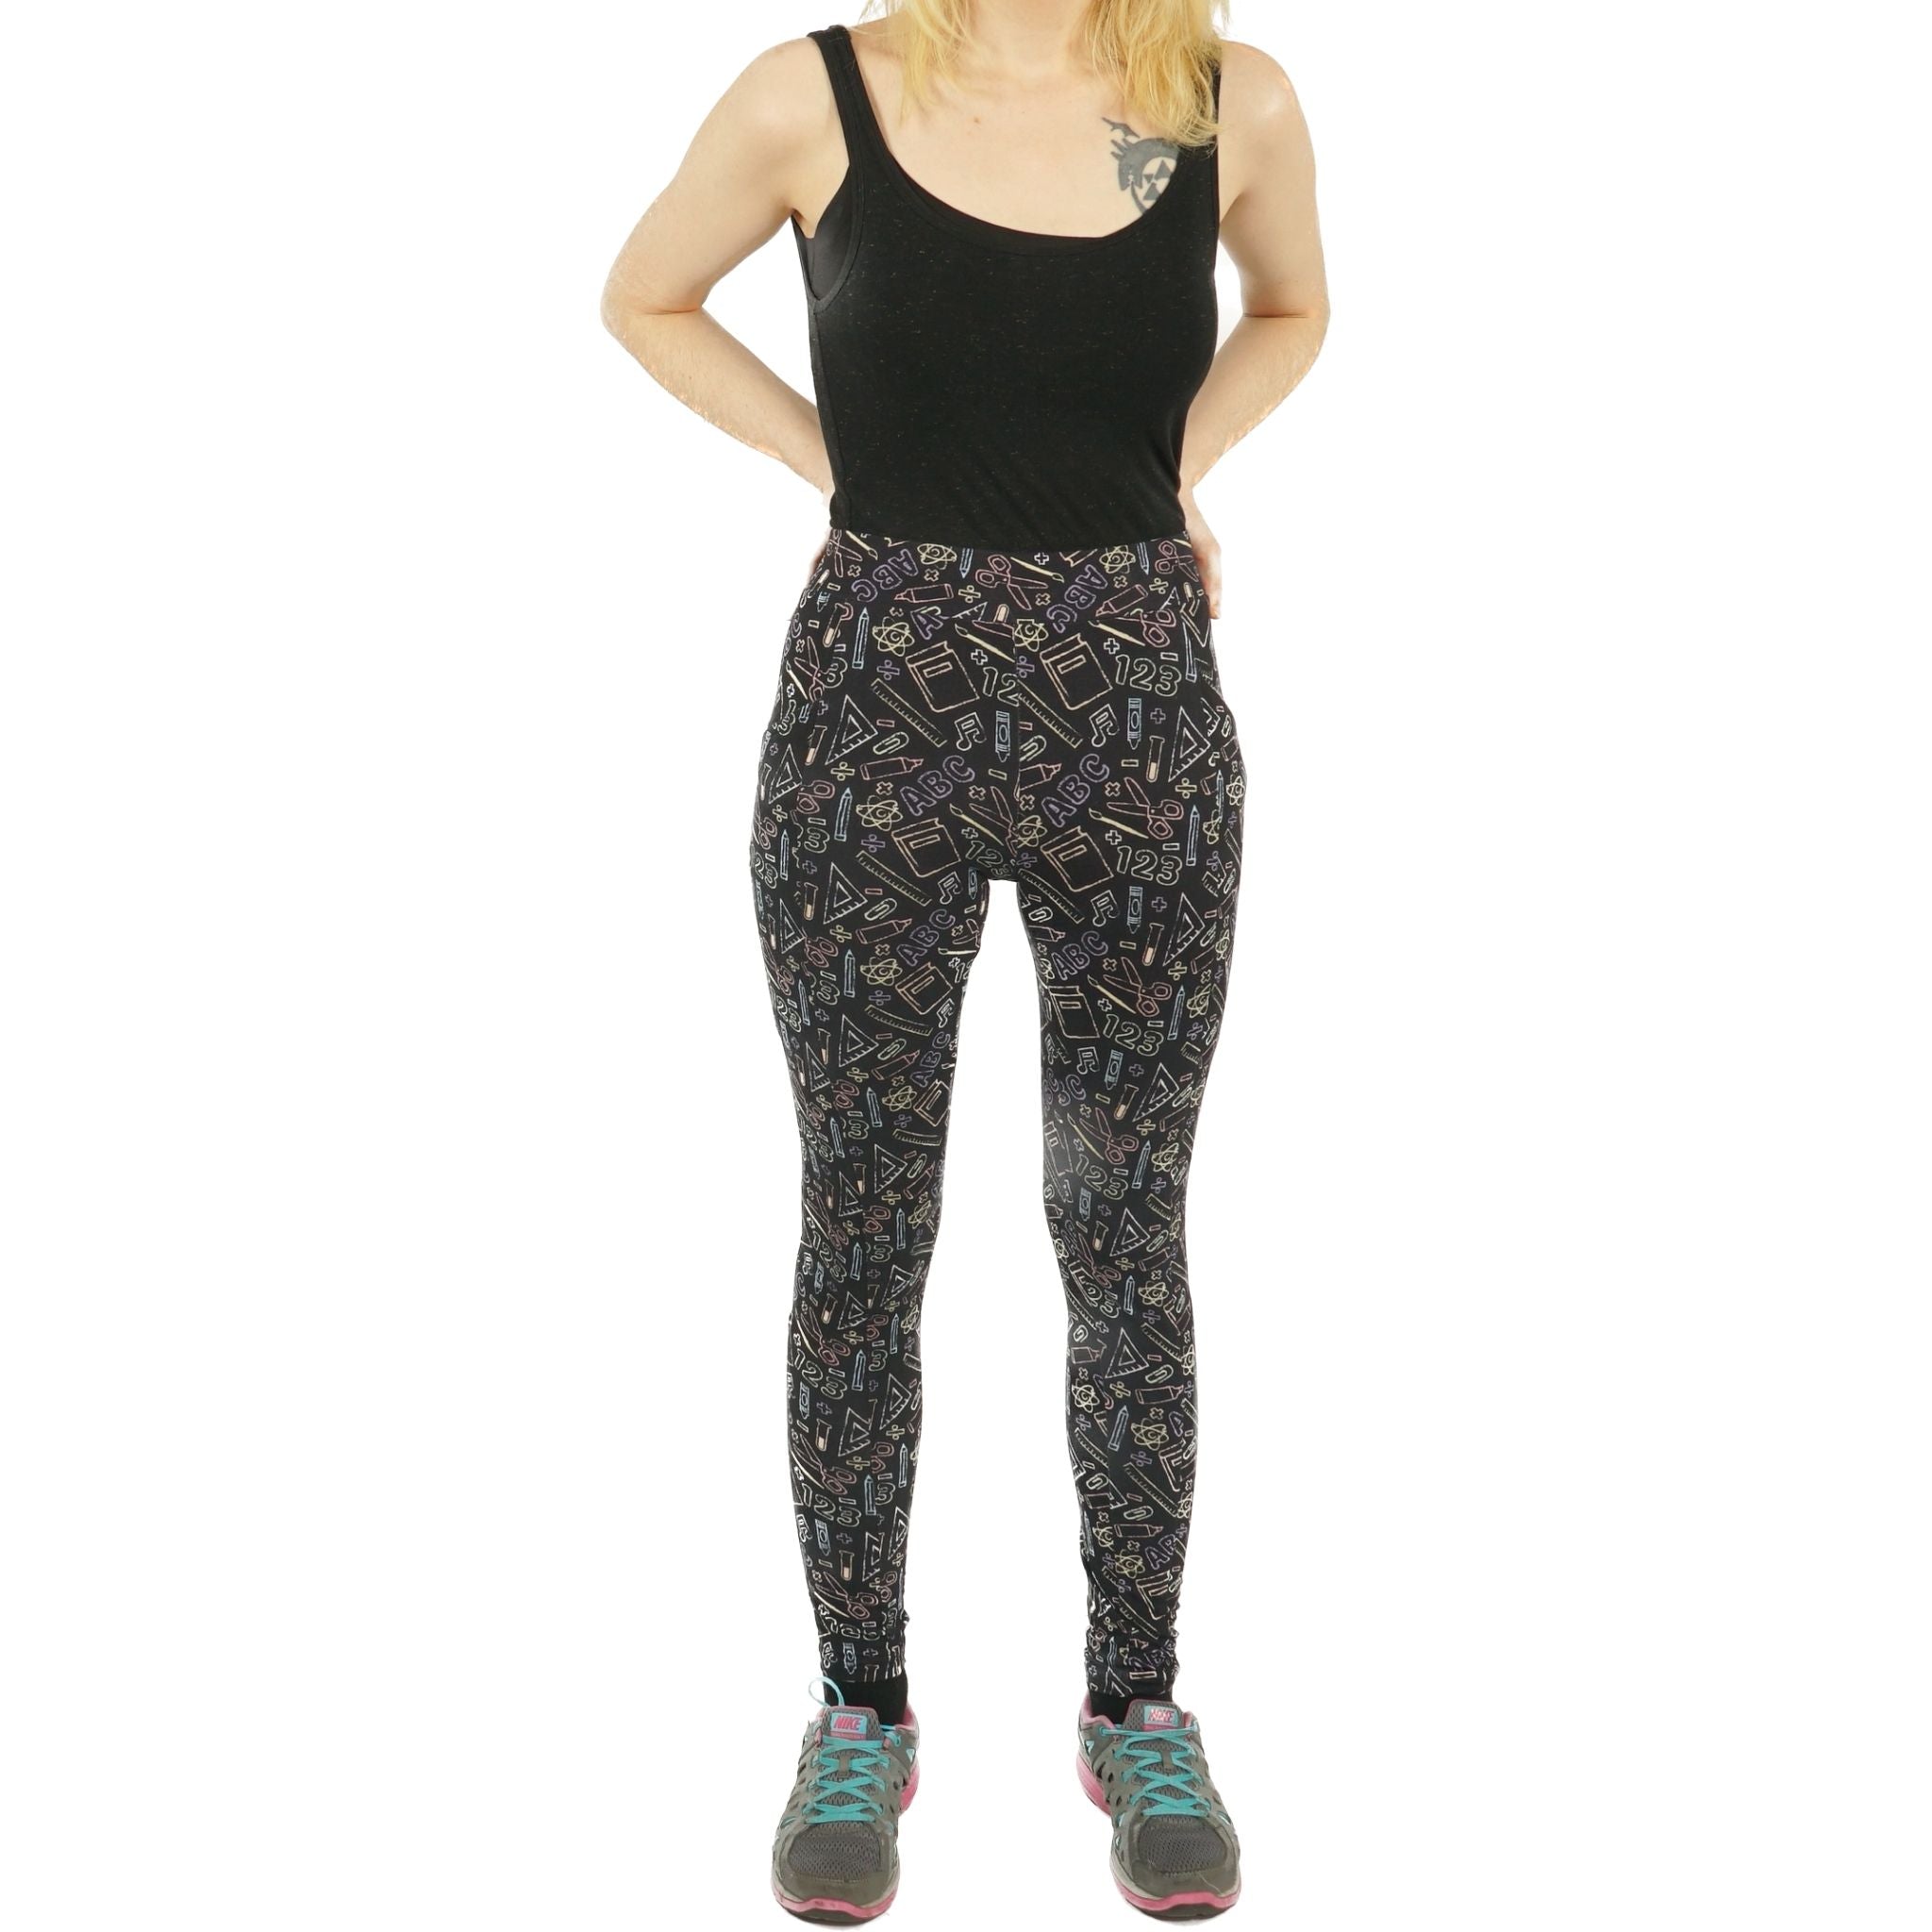 Chalkboard STEAM Adults Leggings with Pockets